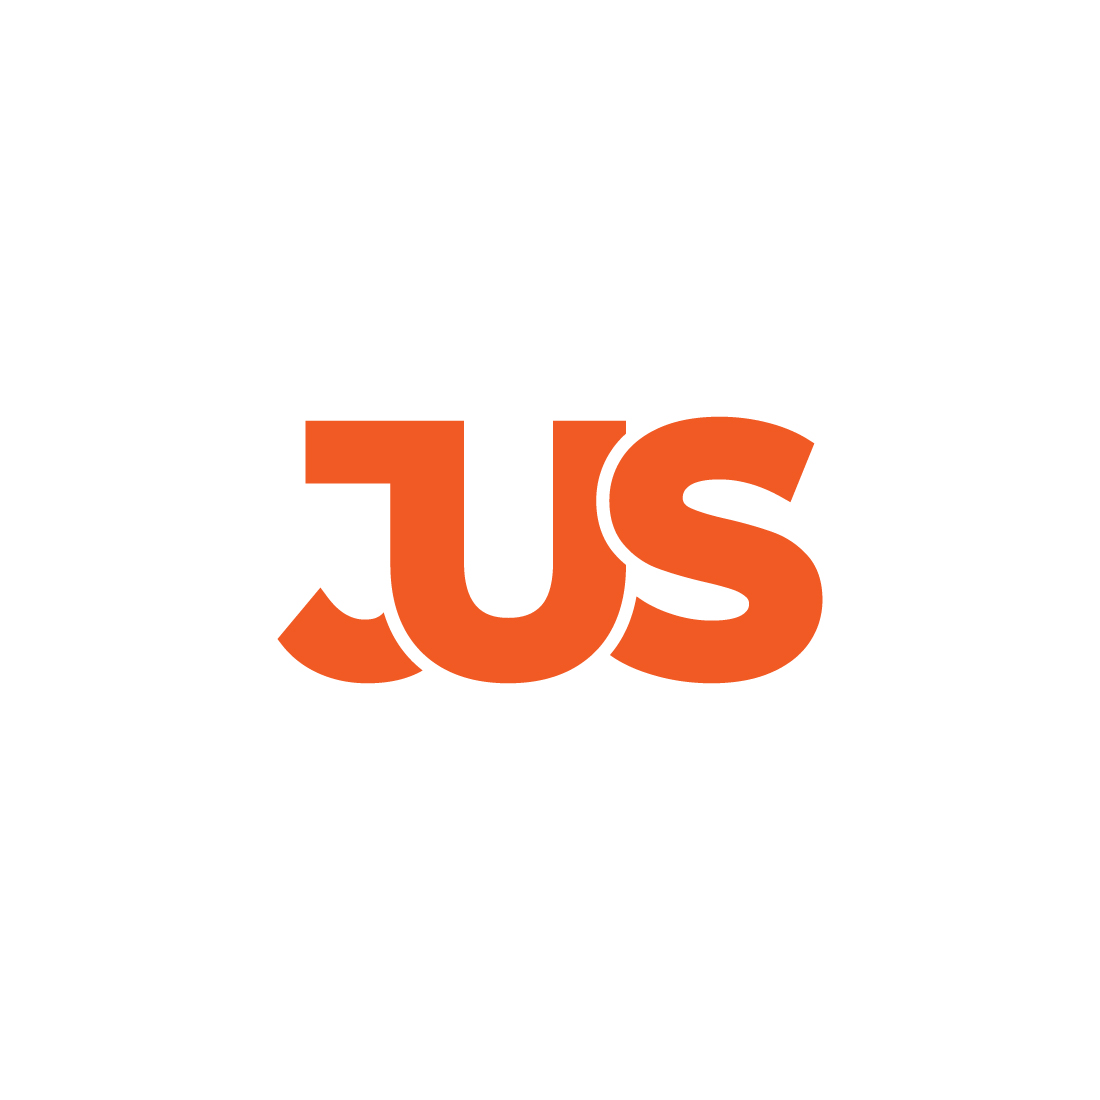 JUS Letter logo design for your brand preview image.